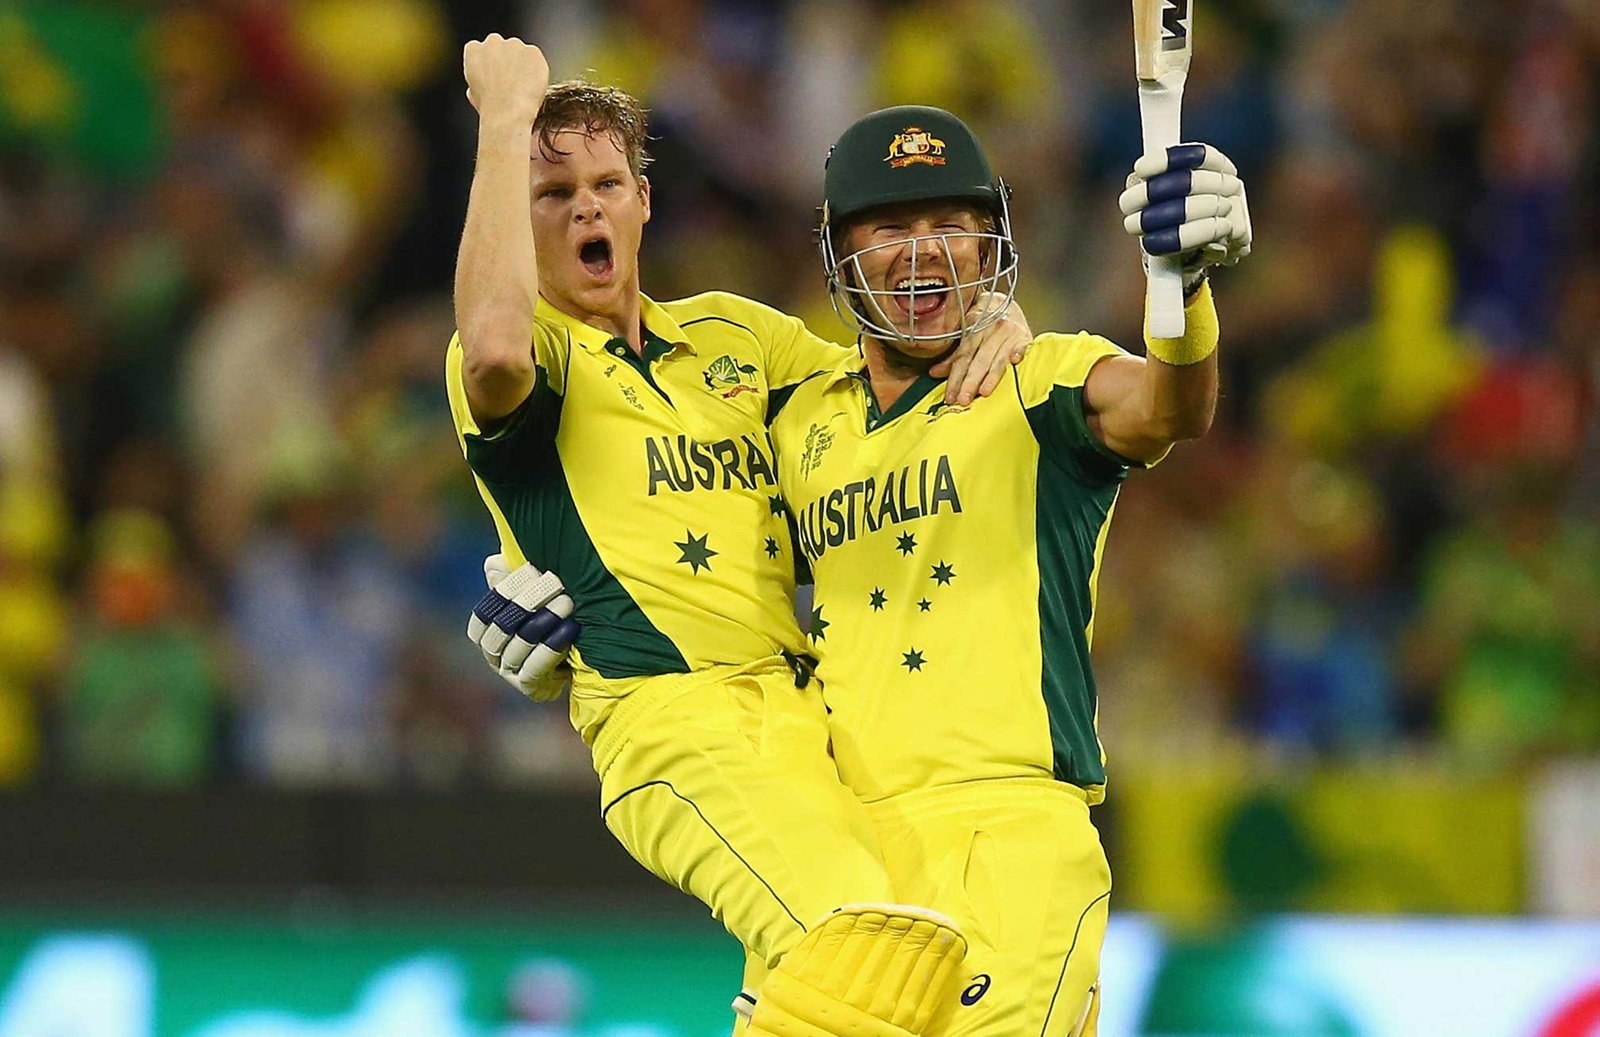 Smith and Watson celebrate after chasing down 183 runs in finals | Getty